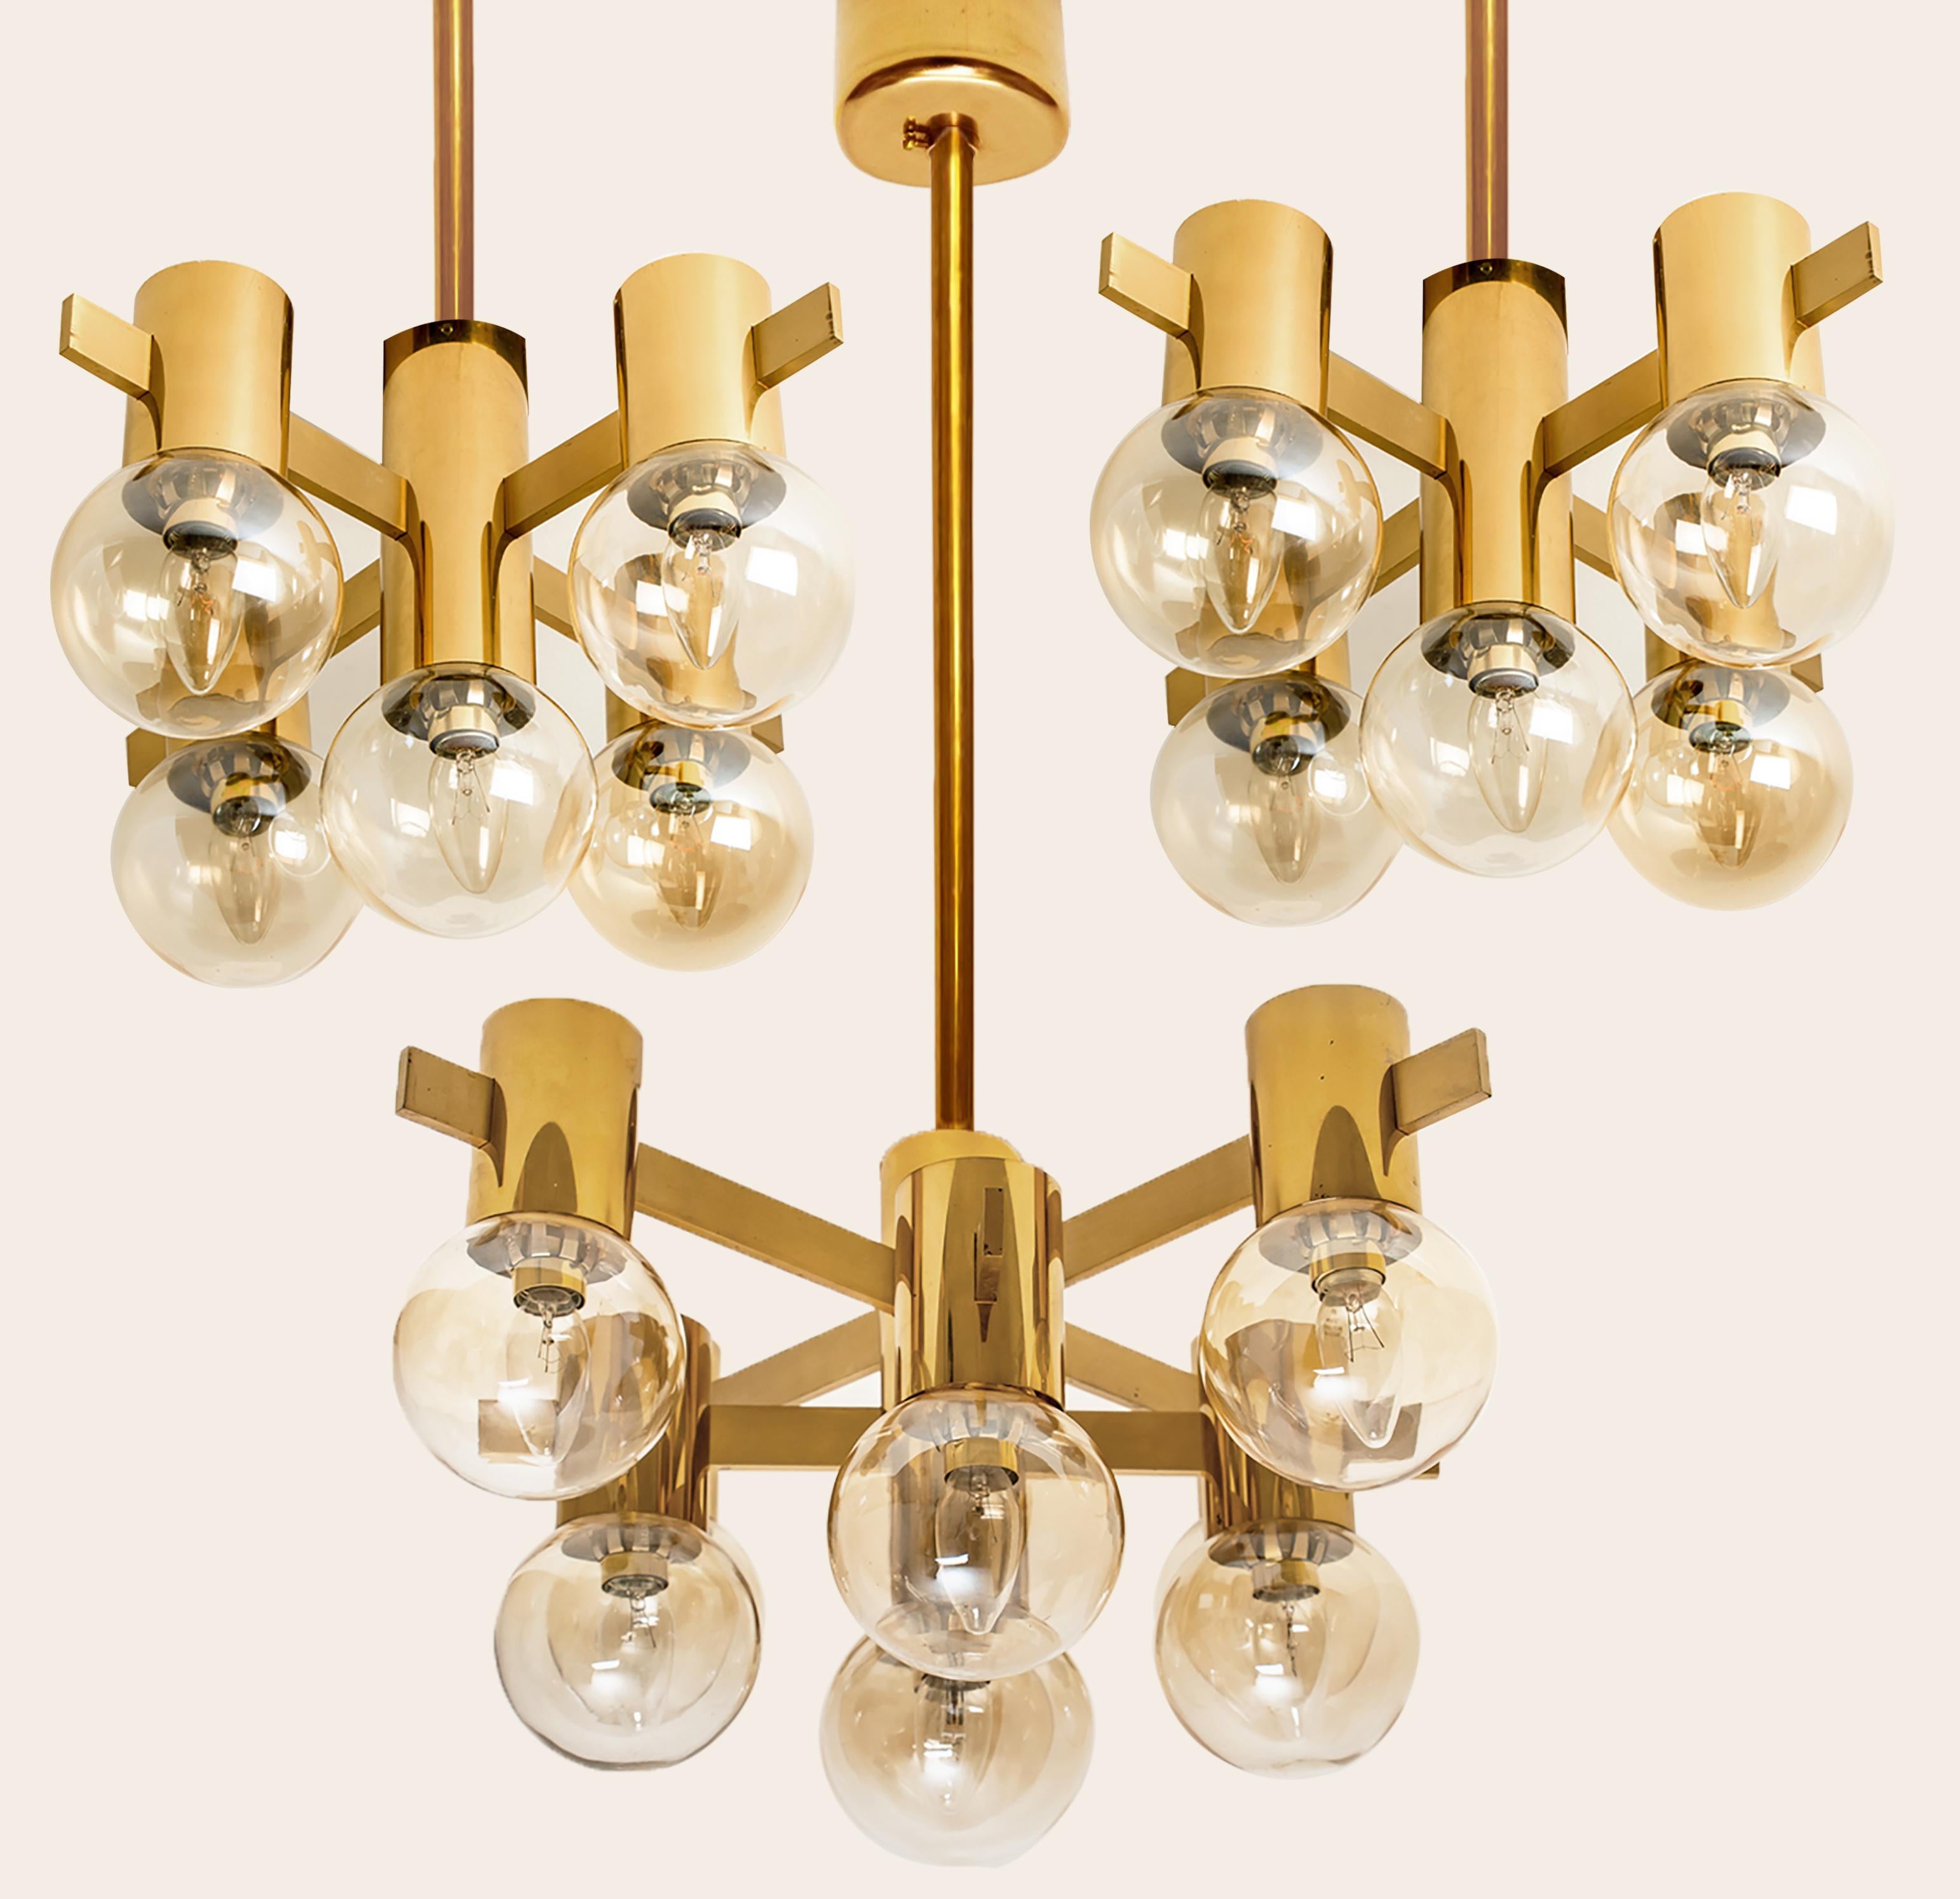 1 of the 3 Brass and Glass Light Fixtures in the Style of Jakobsson, 1960s For Sale 7